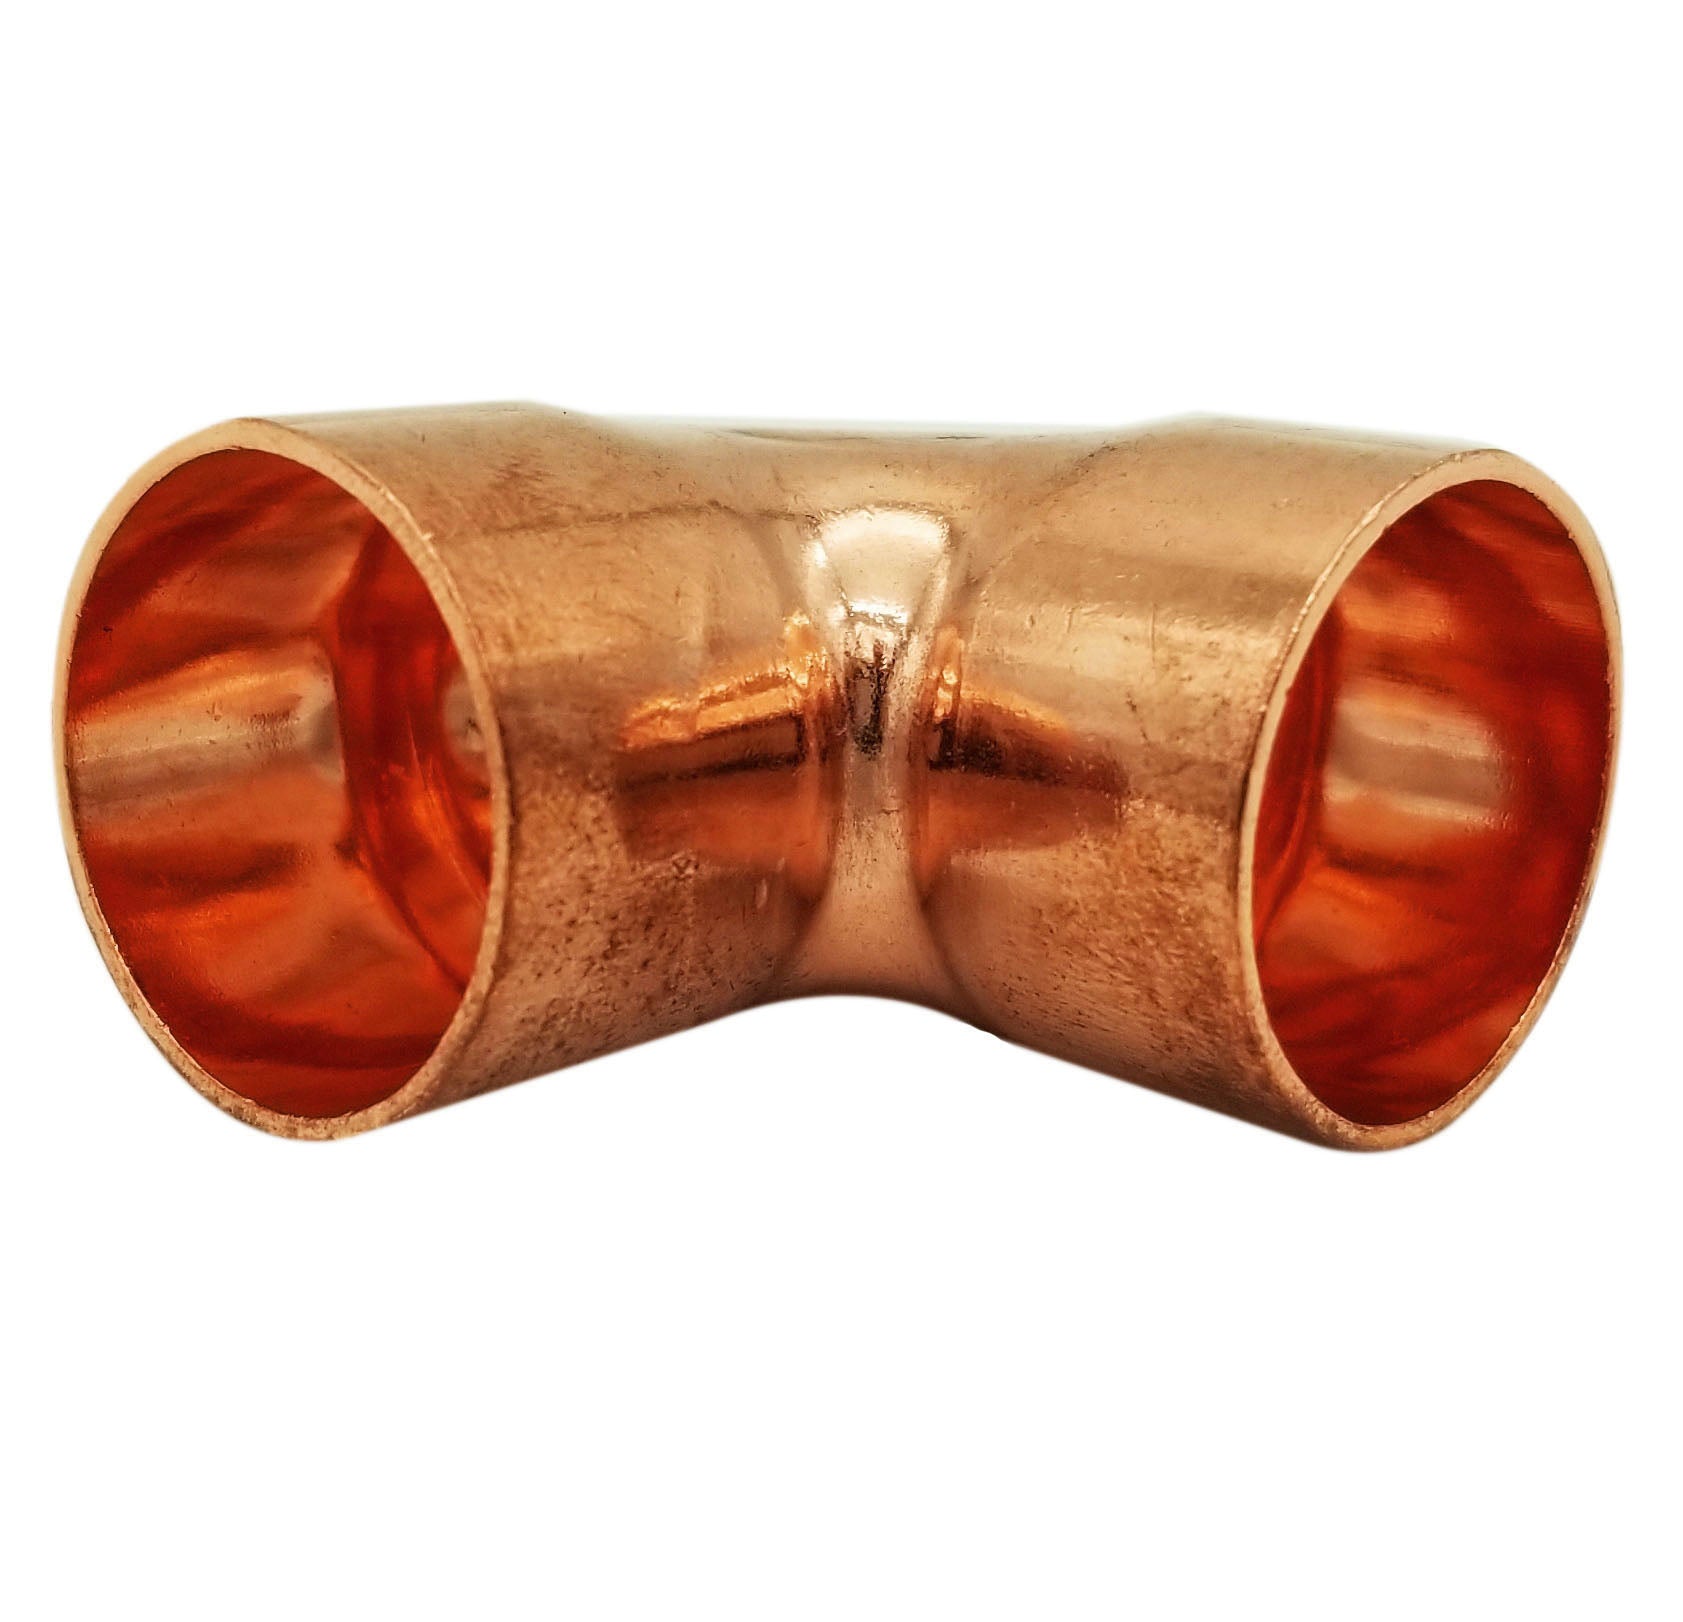 Copper Fitting 7/8 Inch (HVAC Outer Dimension) 3/4 Inch (Plumbing Inner Dimension) - 45 Degree Copper Pressure Elbow & HVAC – 99.9% Pure Copper - 5 Pack